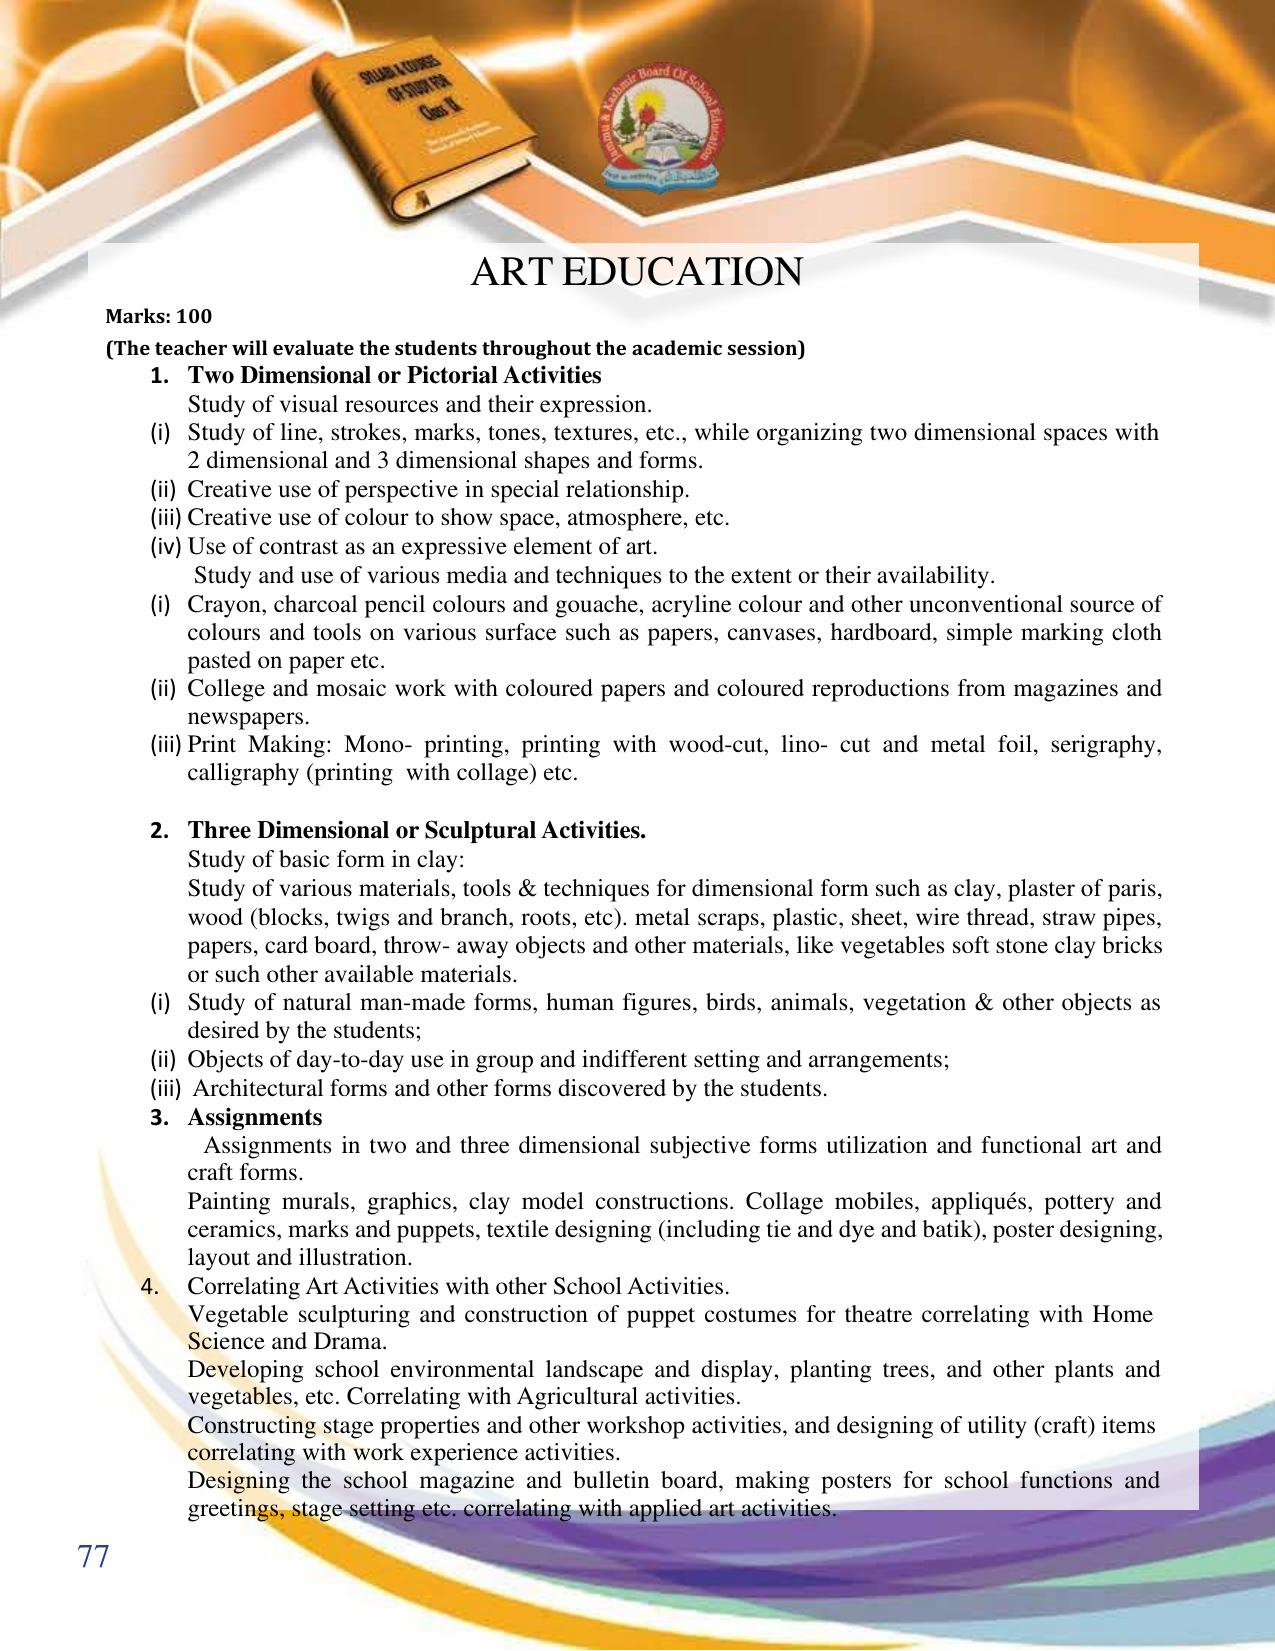 JKBOSE Syllabus for 9th class - Page 78